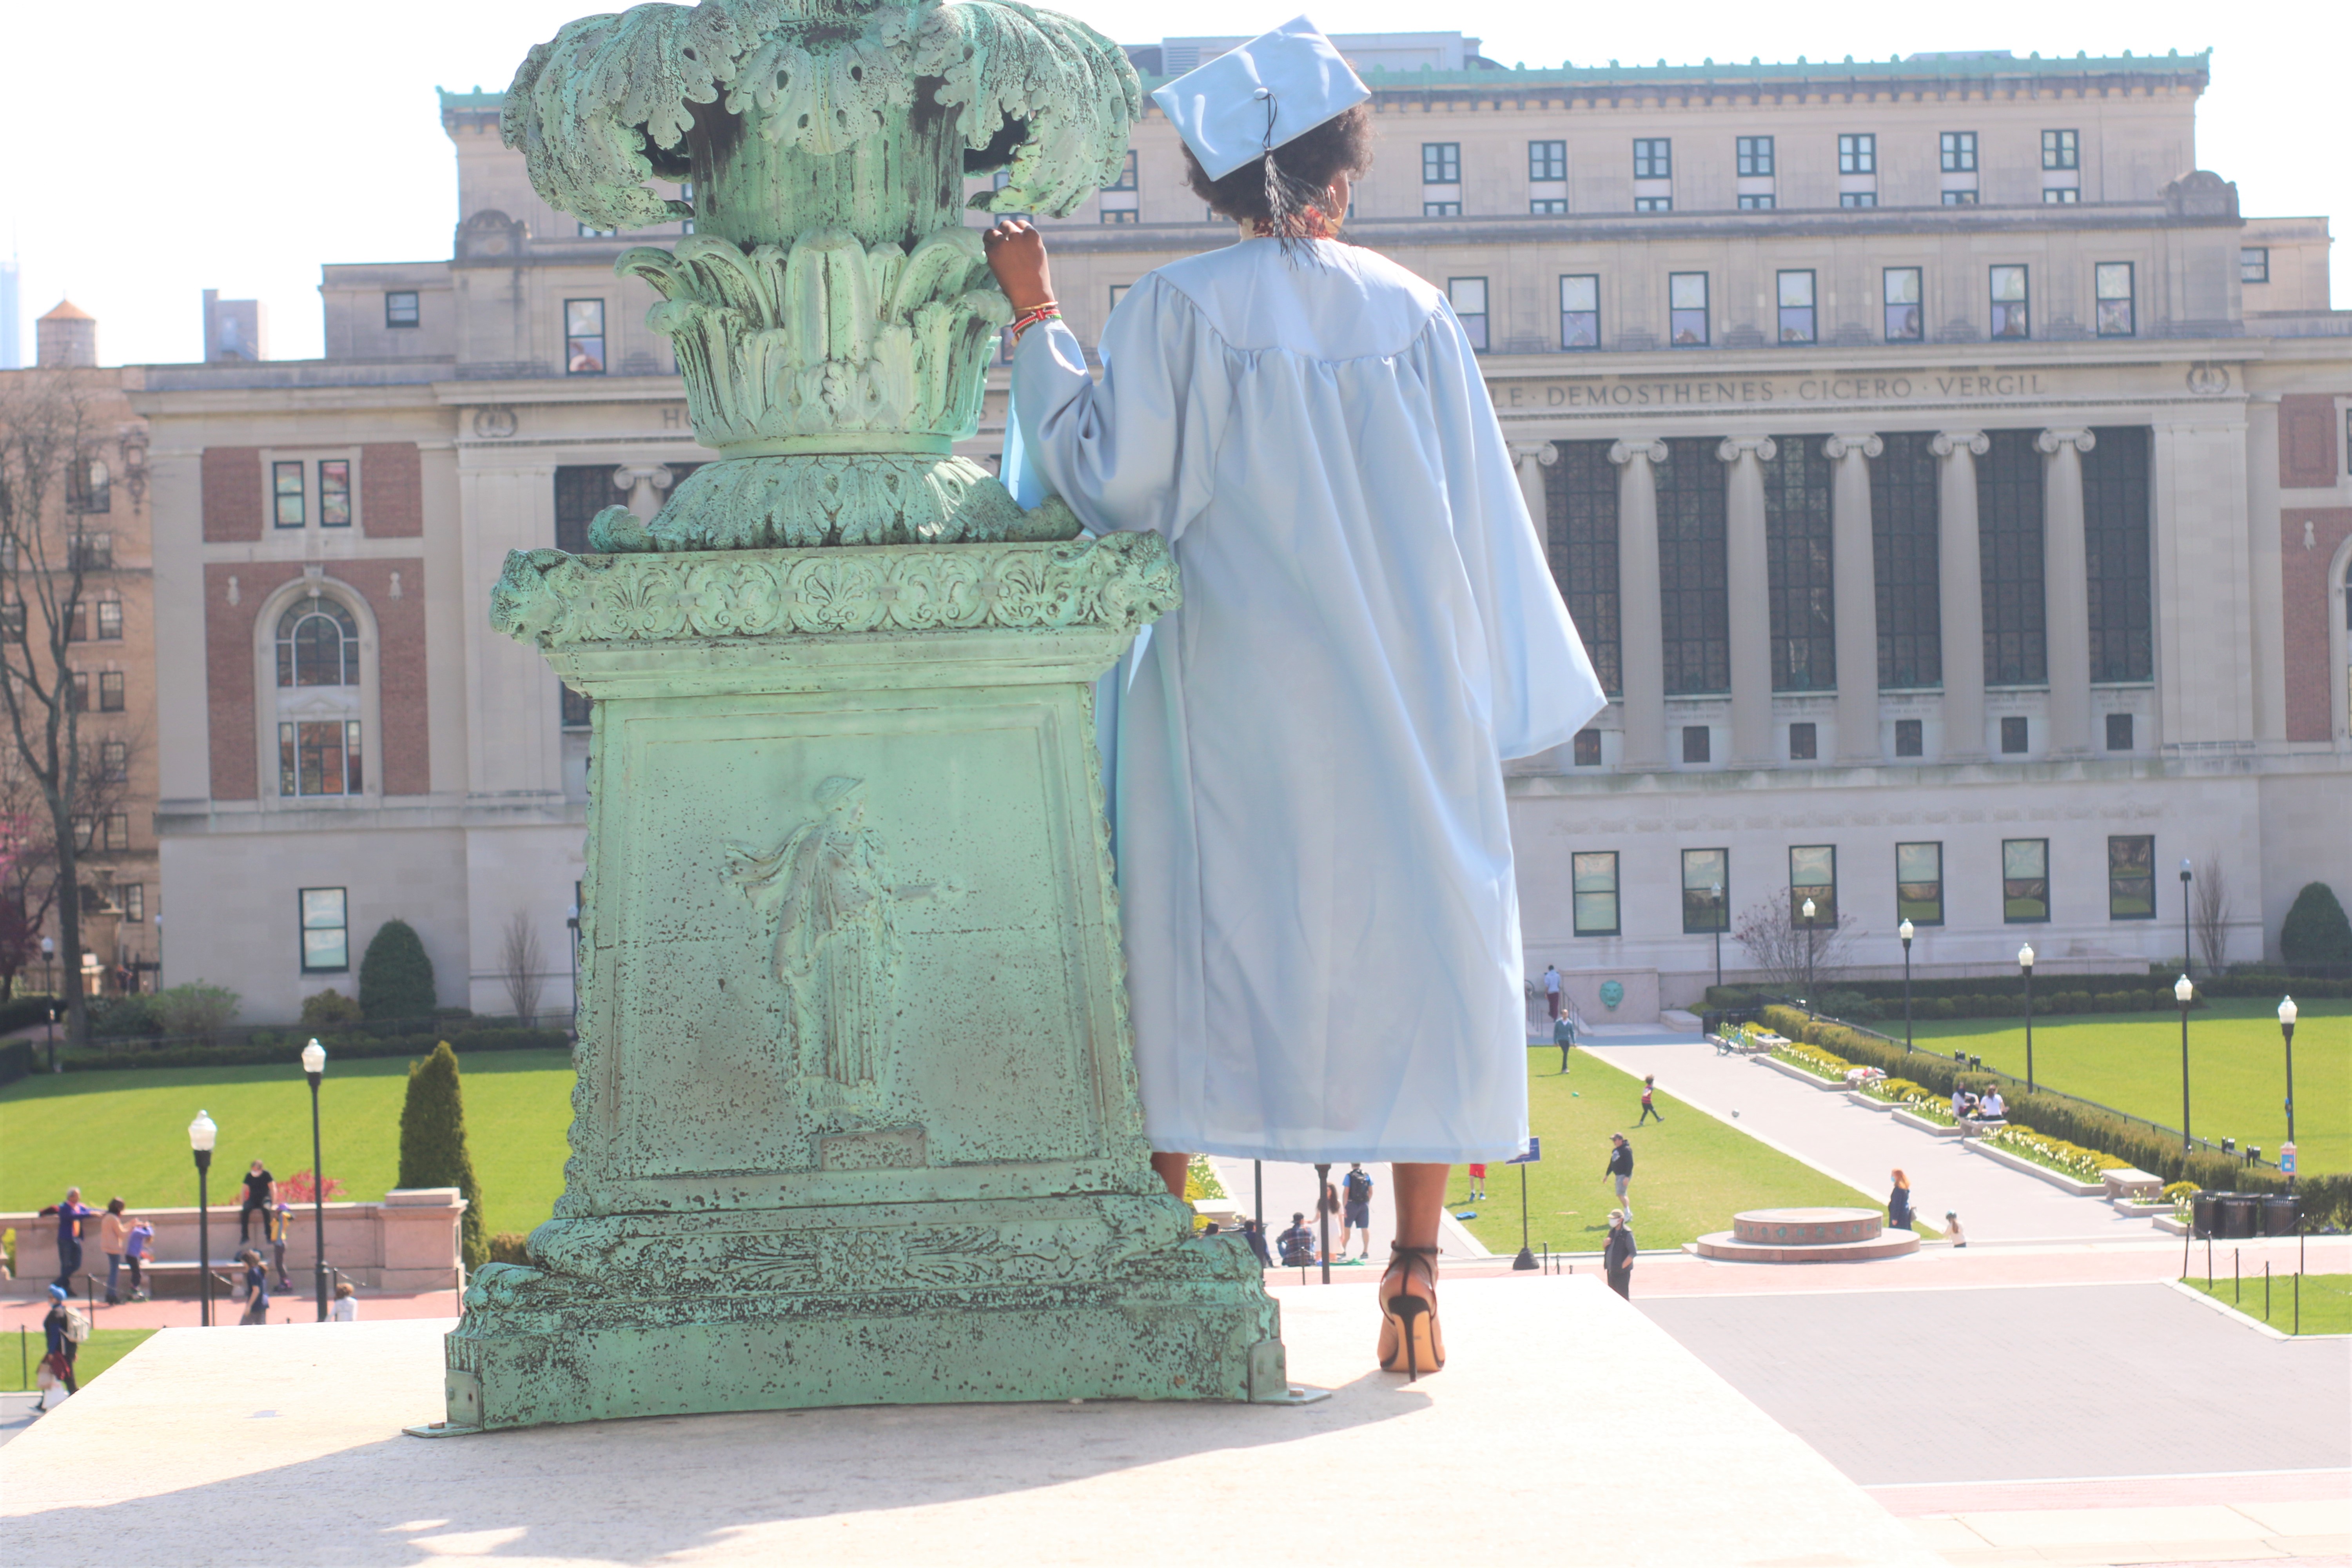 SURVIVAL GUIDE TO YOUR FIRST YEAR AFTER GRADUATION